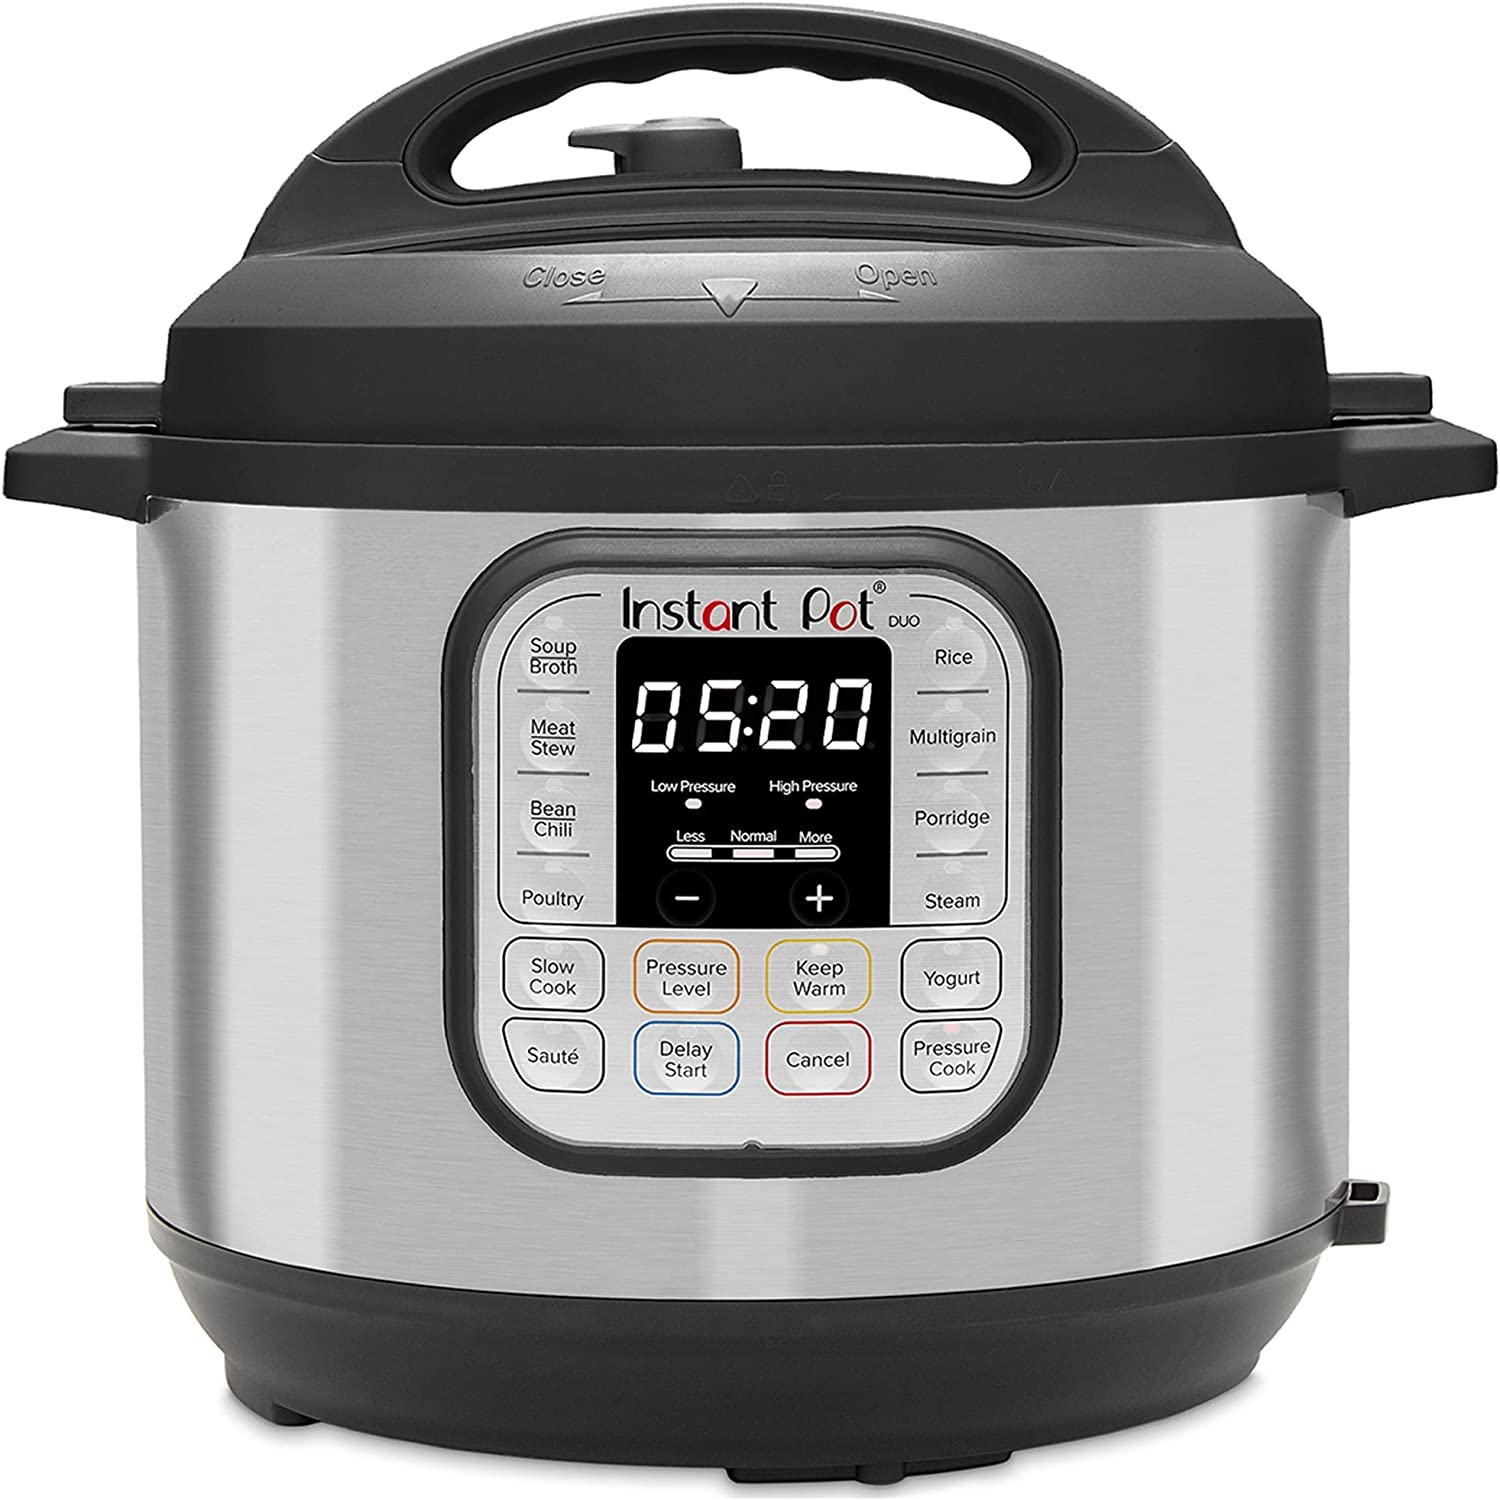 https://bigbigmart.com/wp-content/uploads/2023/07/Instant-Pot-Duo-7-in-1-Electric-Pressure-Cooker-Slow-Cooker-Rice-Cooker-Steamer-Saute-Yogurt-Maker-Warmer-Sterilizer-Includes-Free-App-with-over-1900-Recipes-Stainless-Steel-8-Quart.jpg